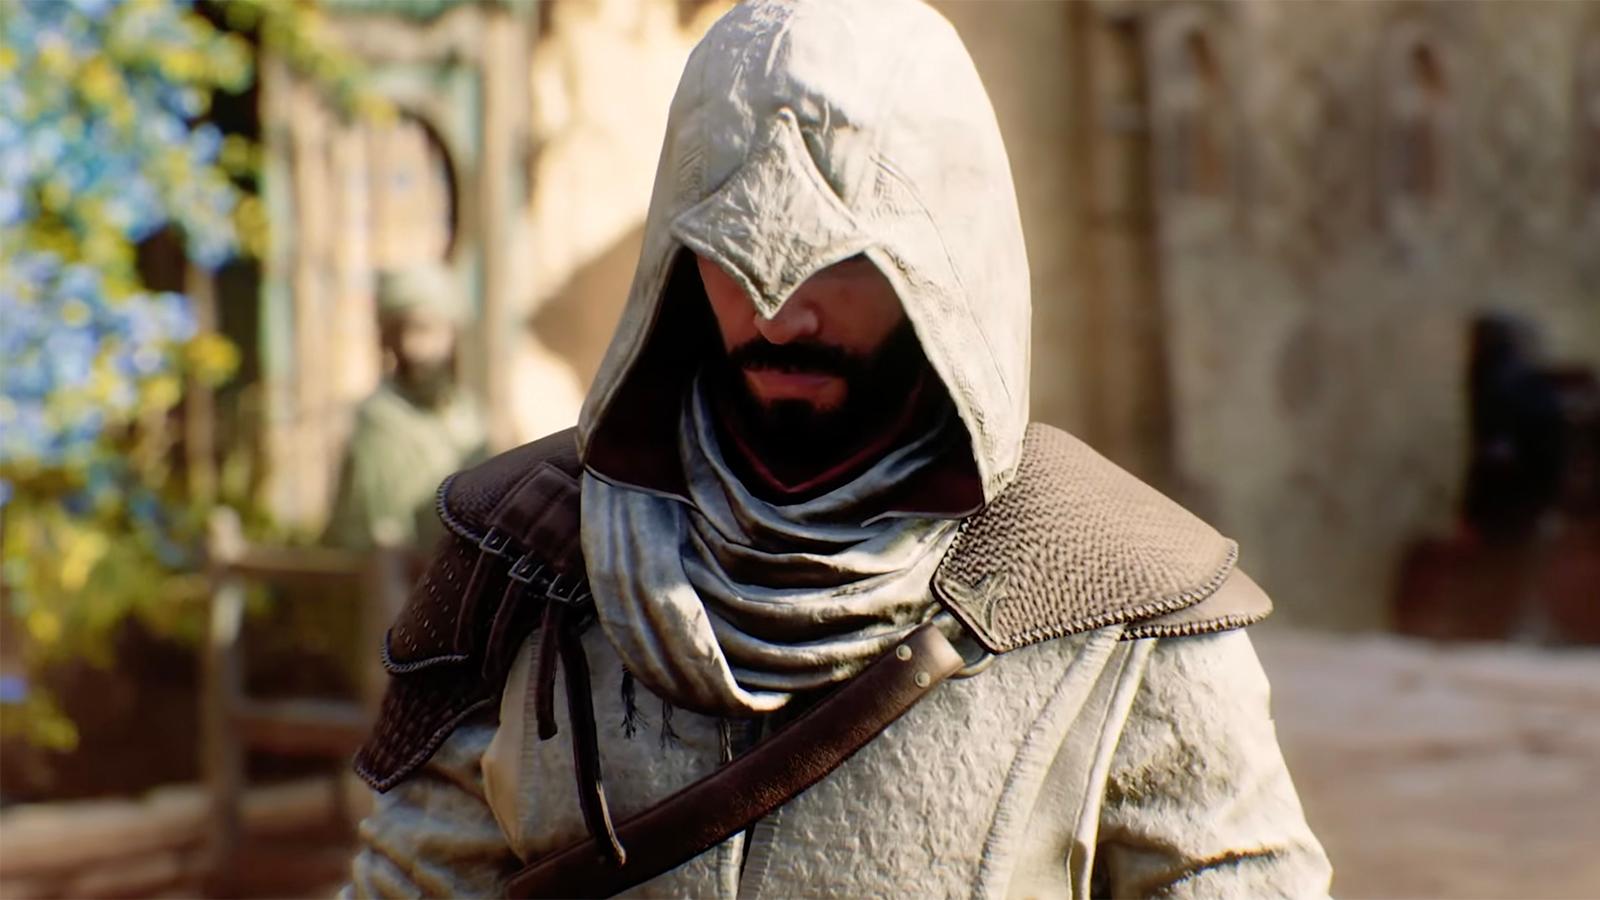 Assassin's Creed Mirage Launch Pushed to 2024